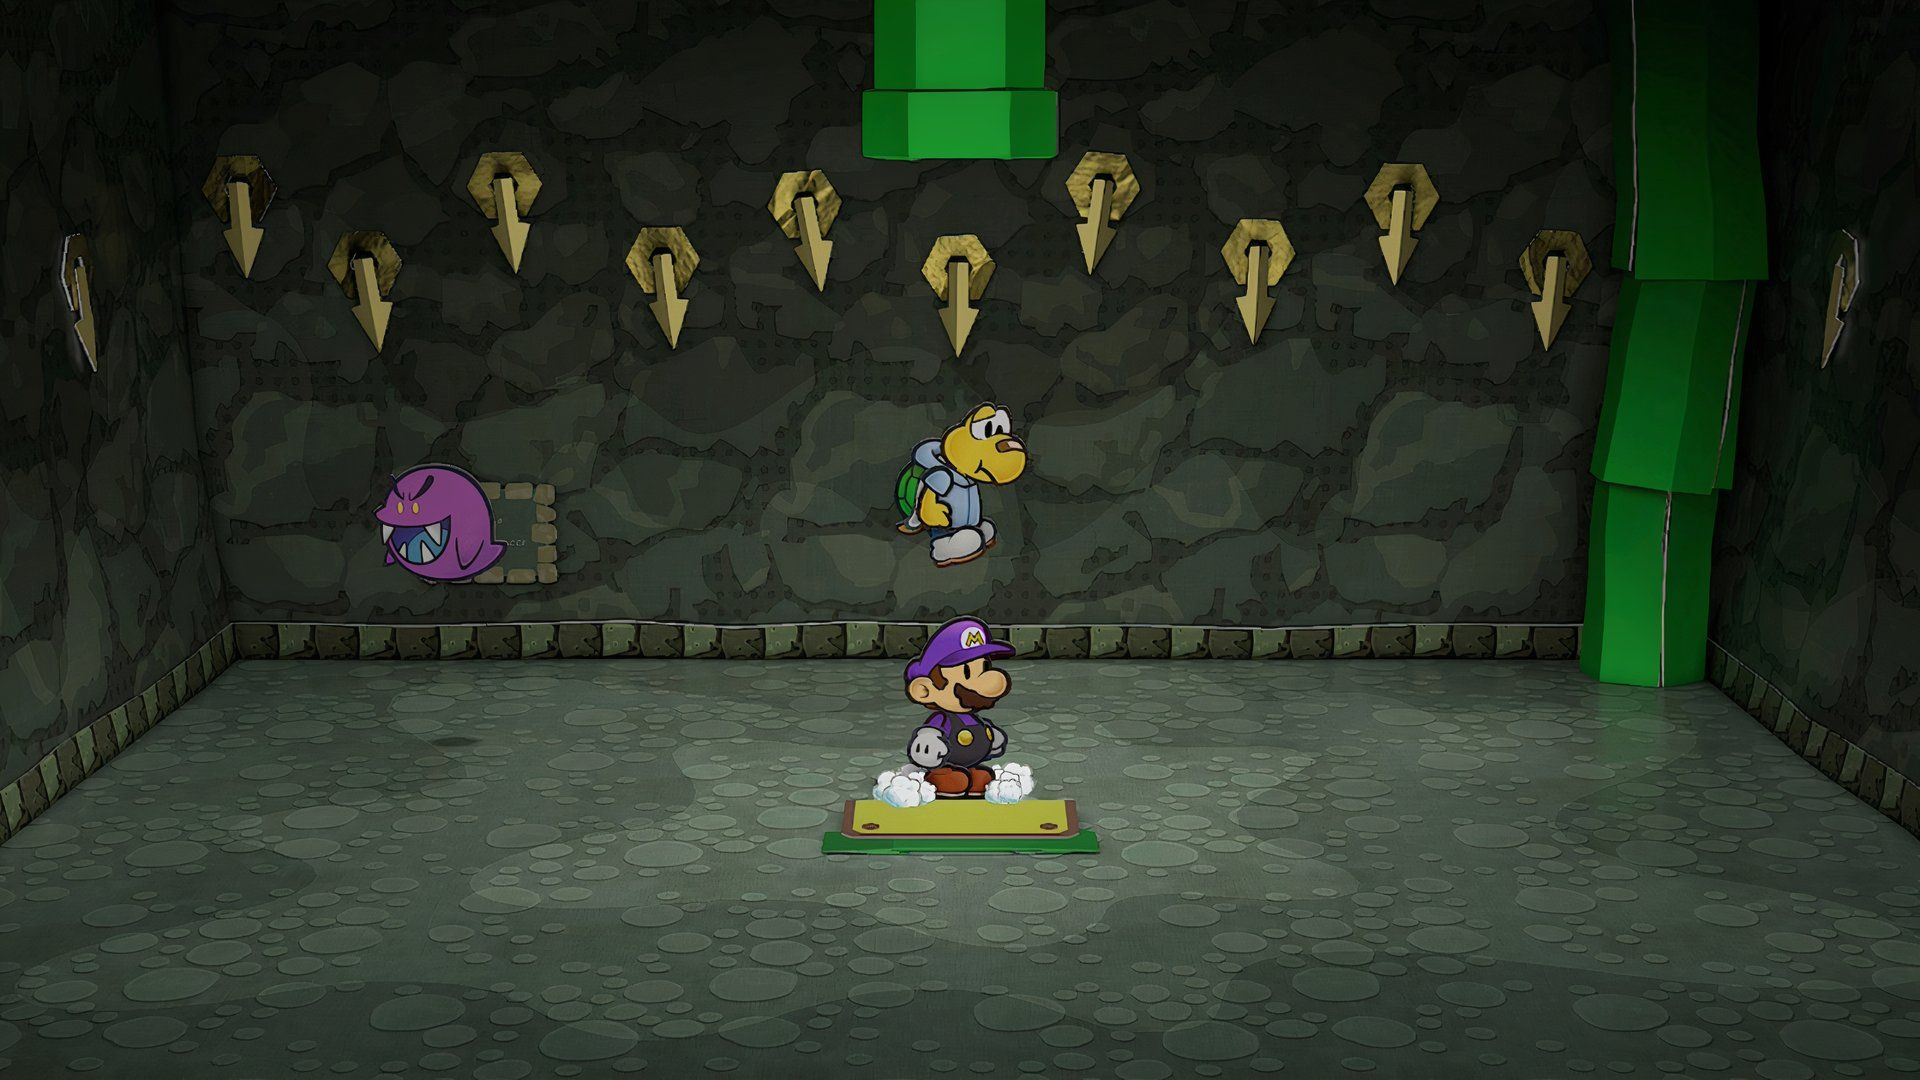 Paper Mario: The Thousand-Year Door - Pit of 100 Trials with Dark Boo